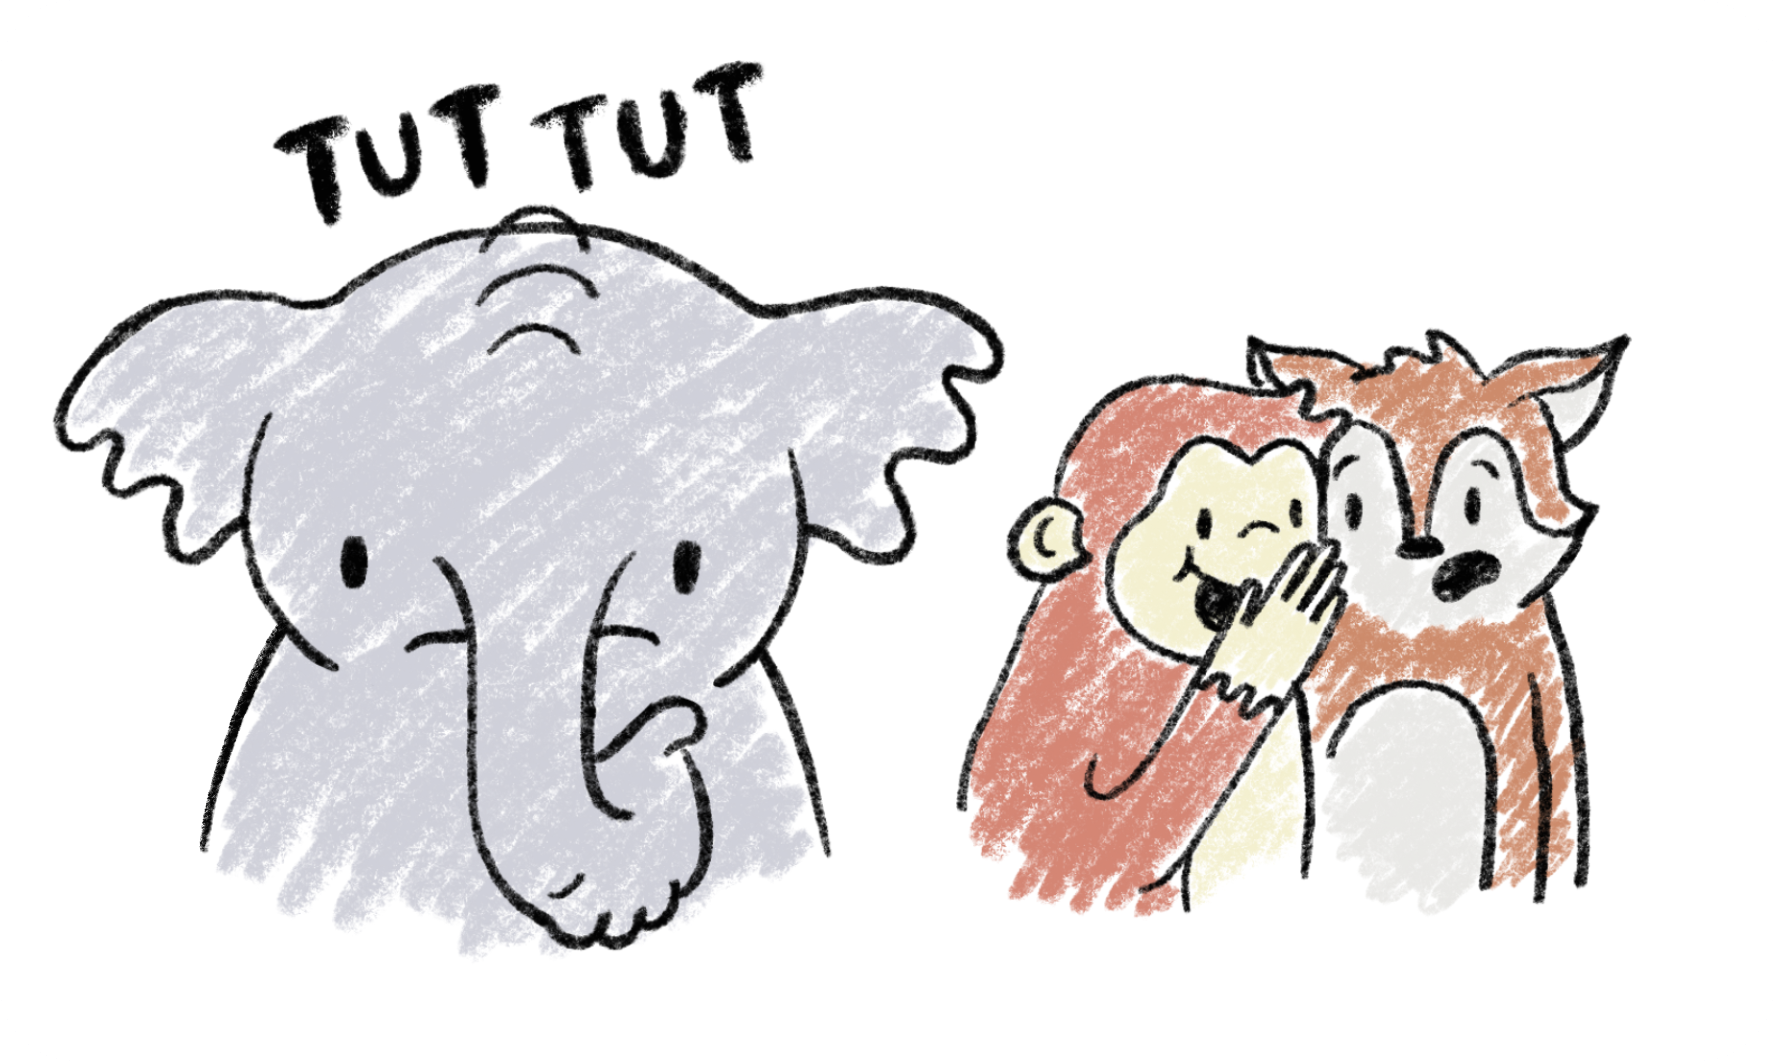 A judgemental
elephant on the left and a gossipy monkey on the right.